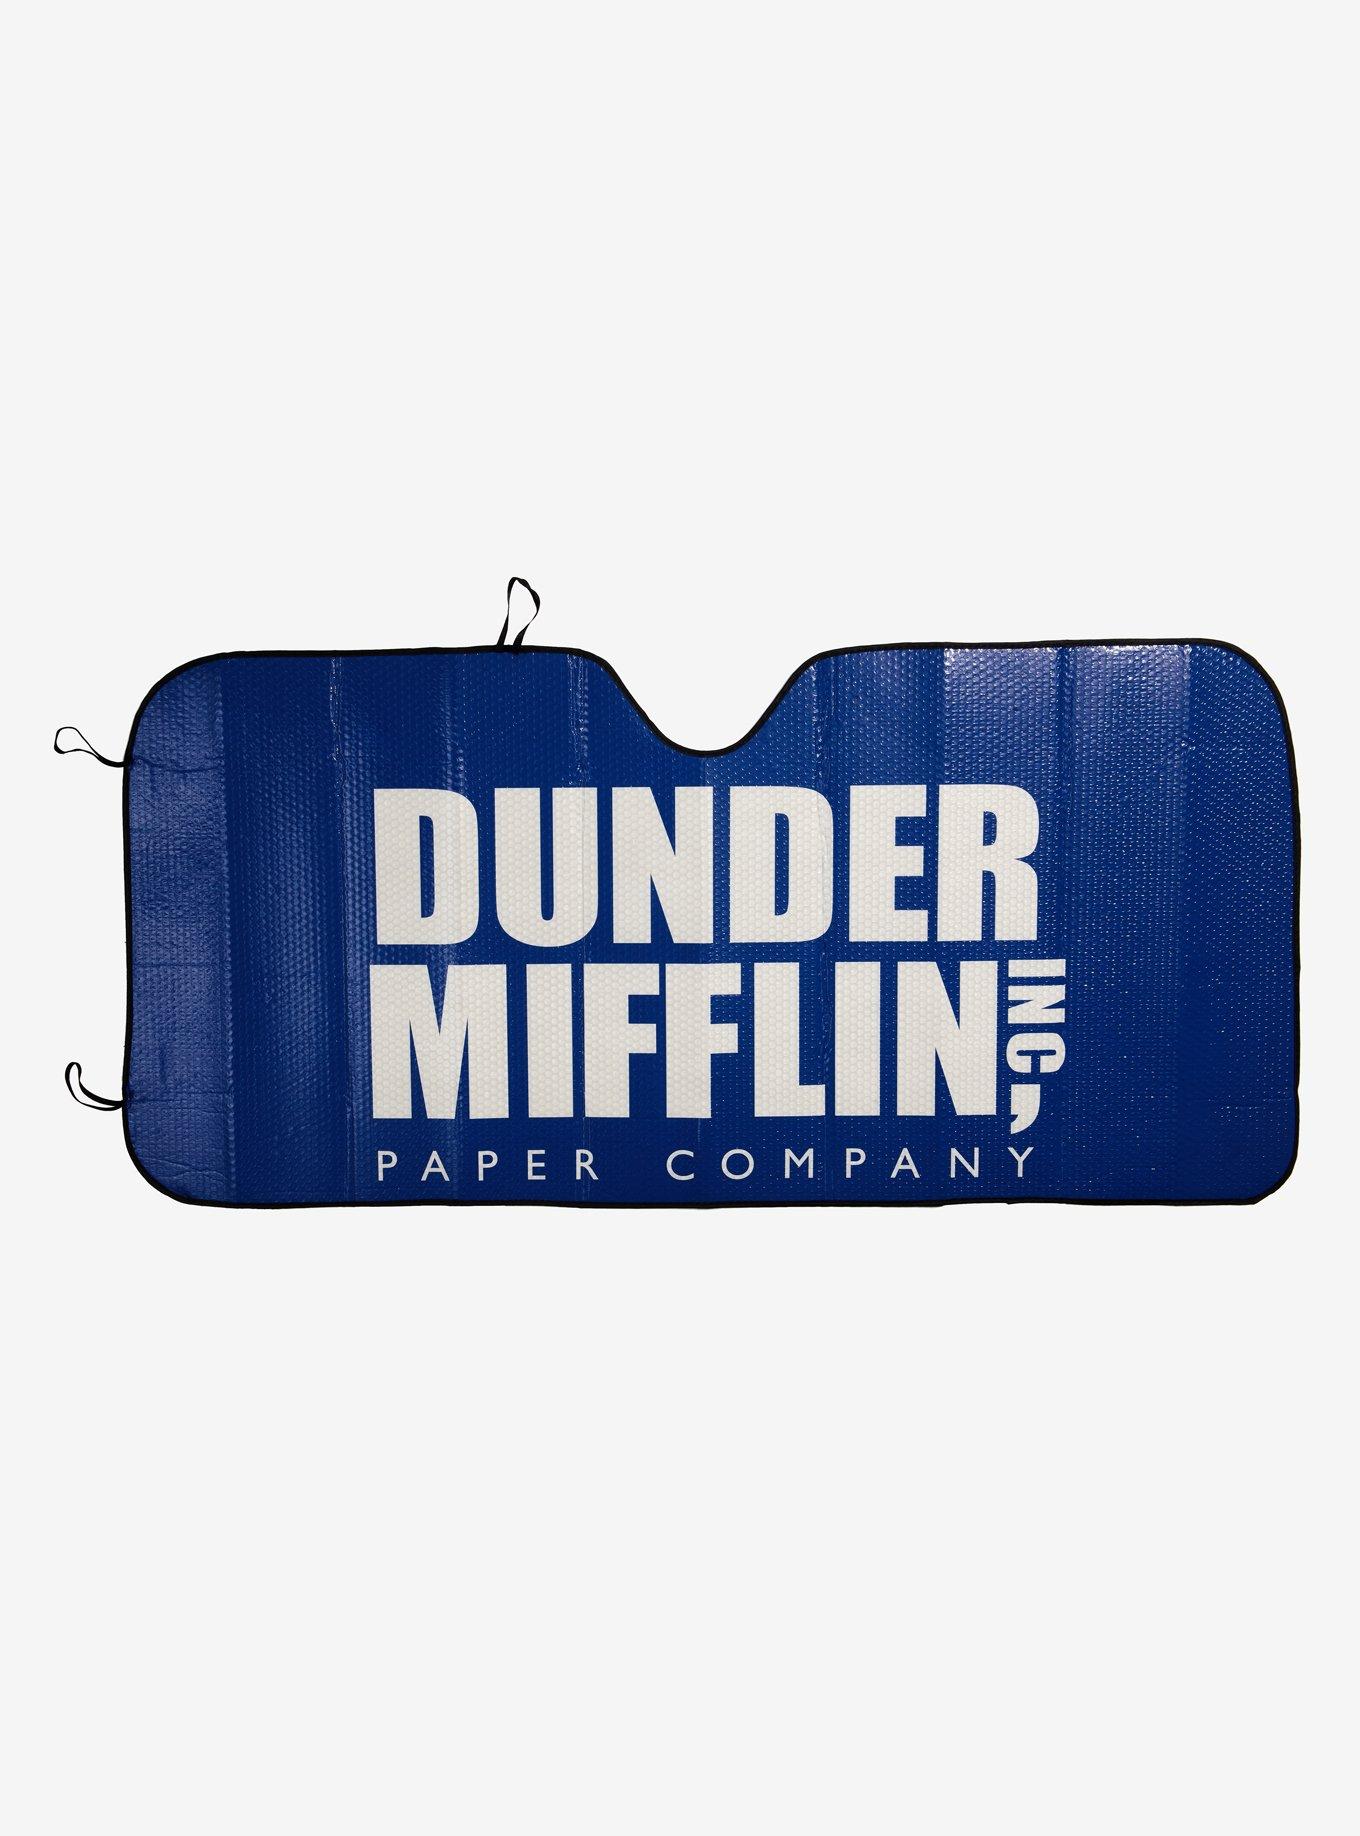 The Office Dunder Mifflin Logo Enamel Pin | Perfect Gift For Fans Of The  Office